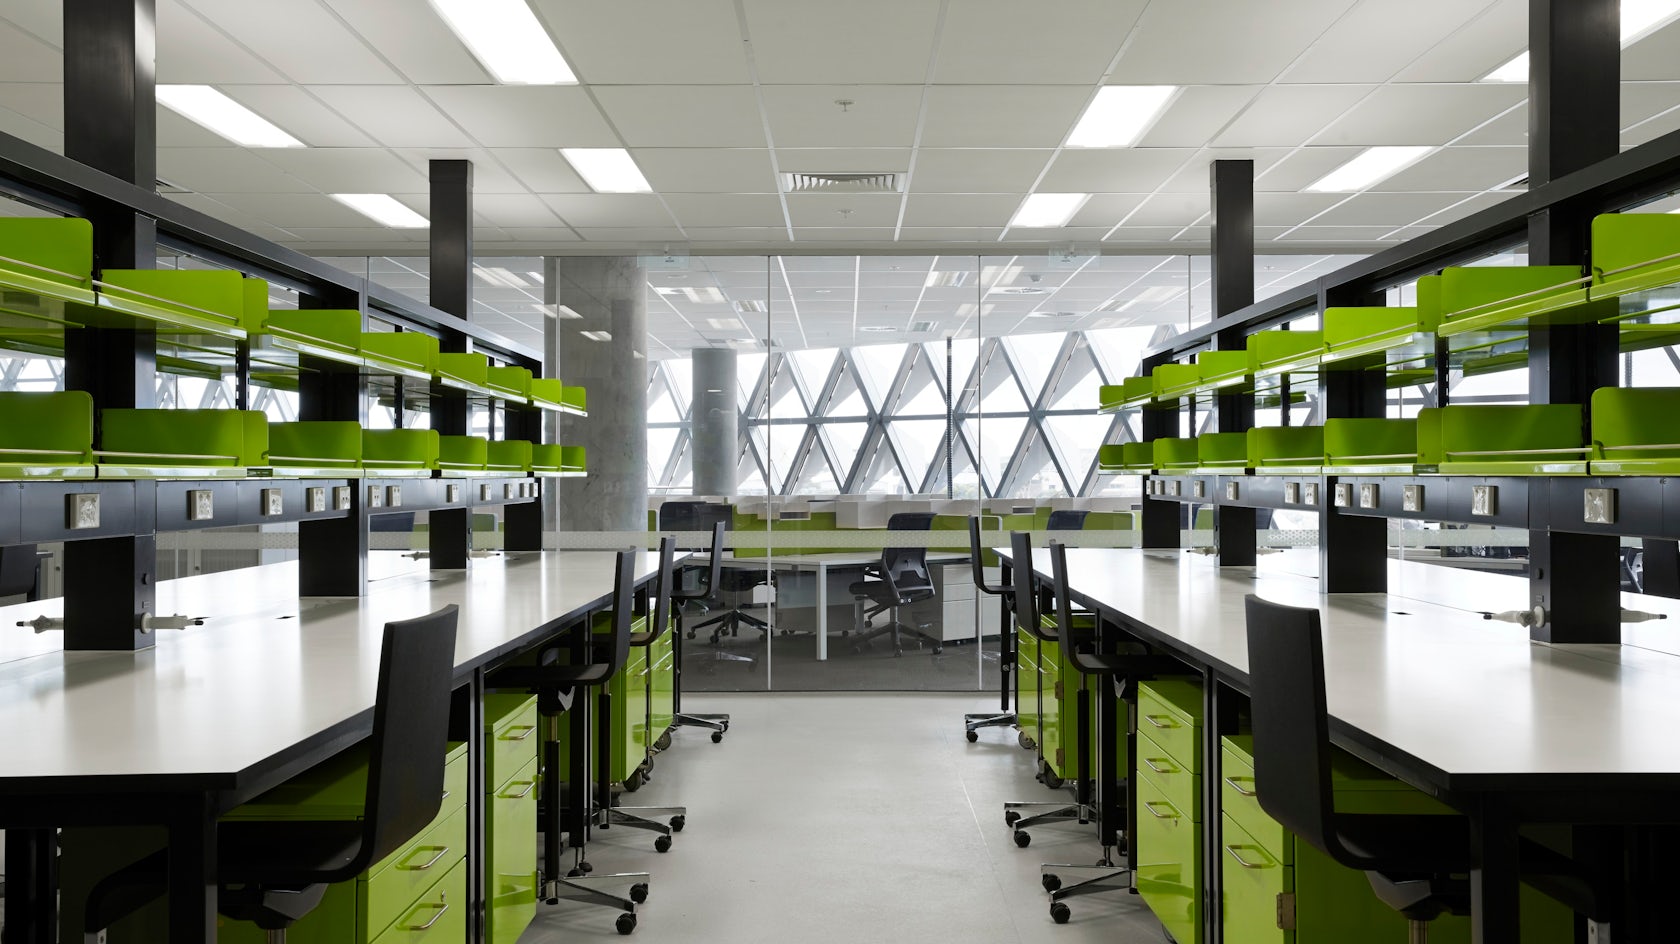 South Australian Health and Medical Research Institute ...